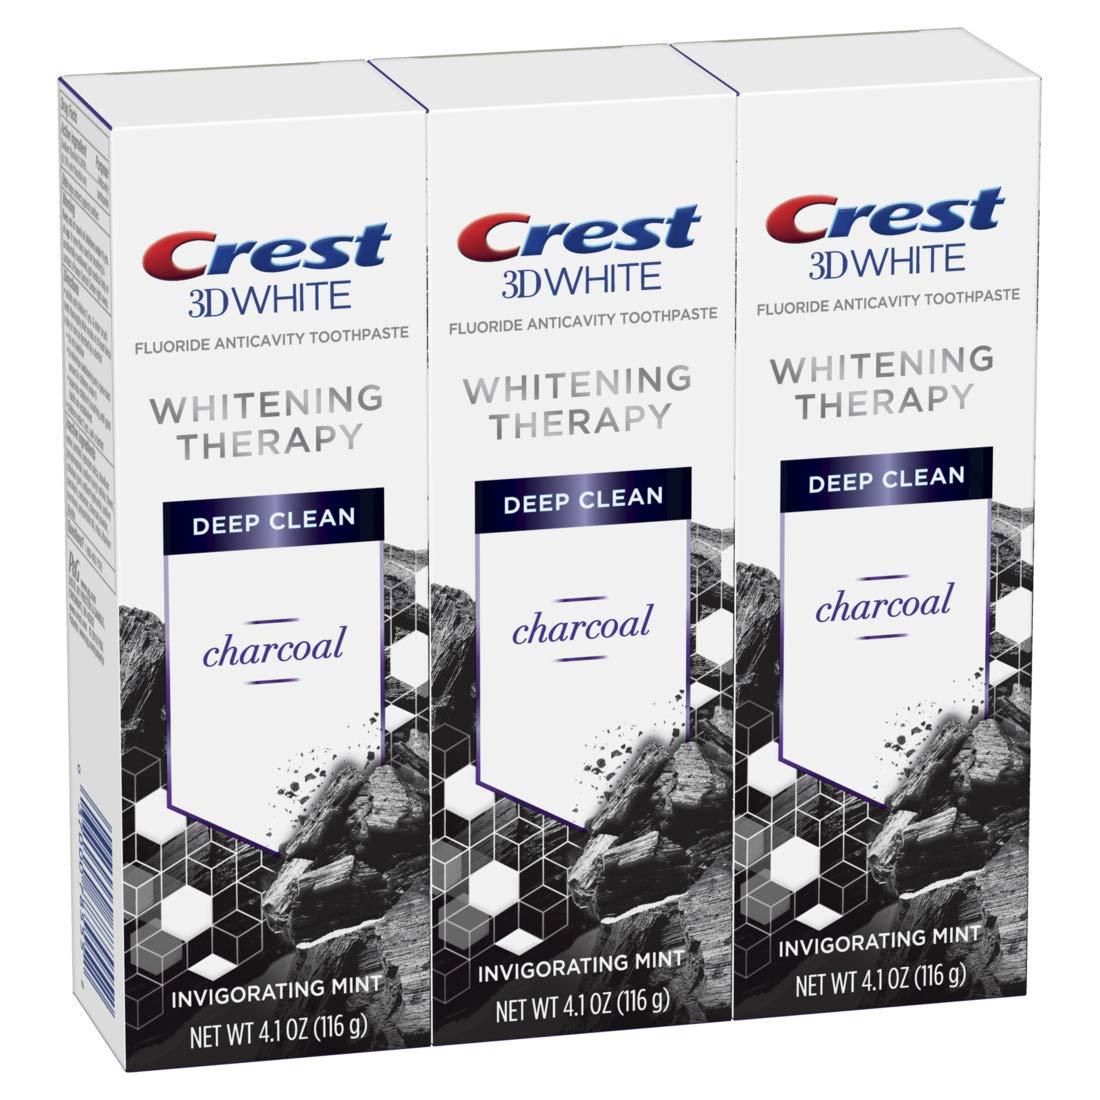 3 Crest 3D White Deep Clean Whitening Therapy Charcoal Toothpastes for $9.49